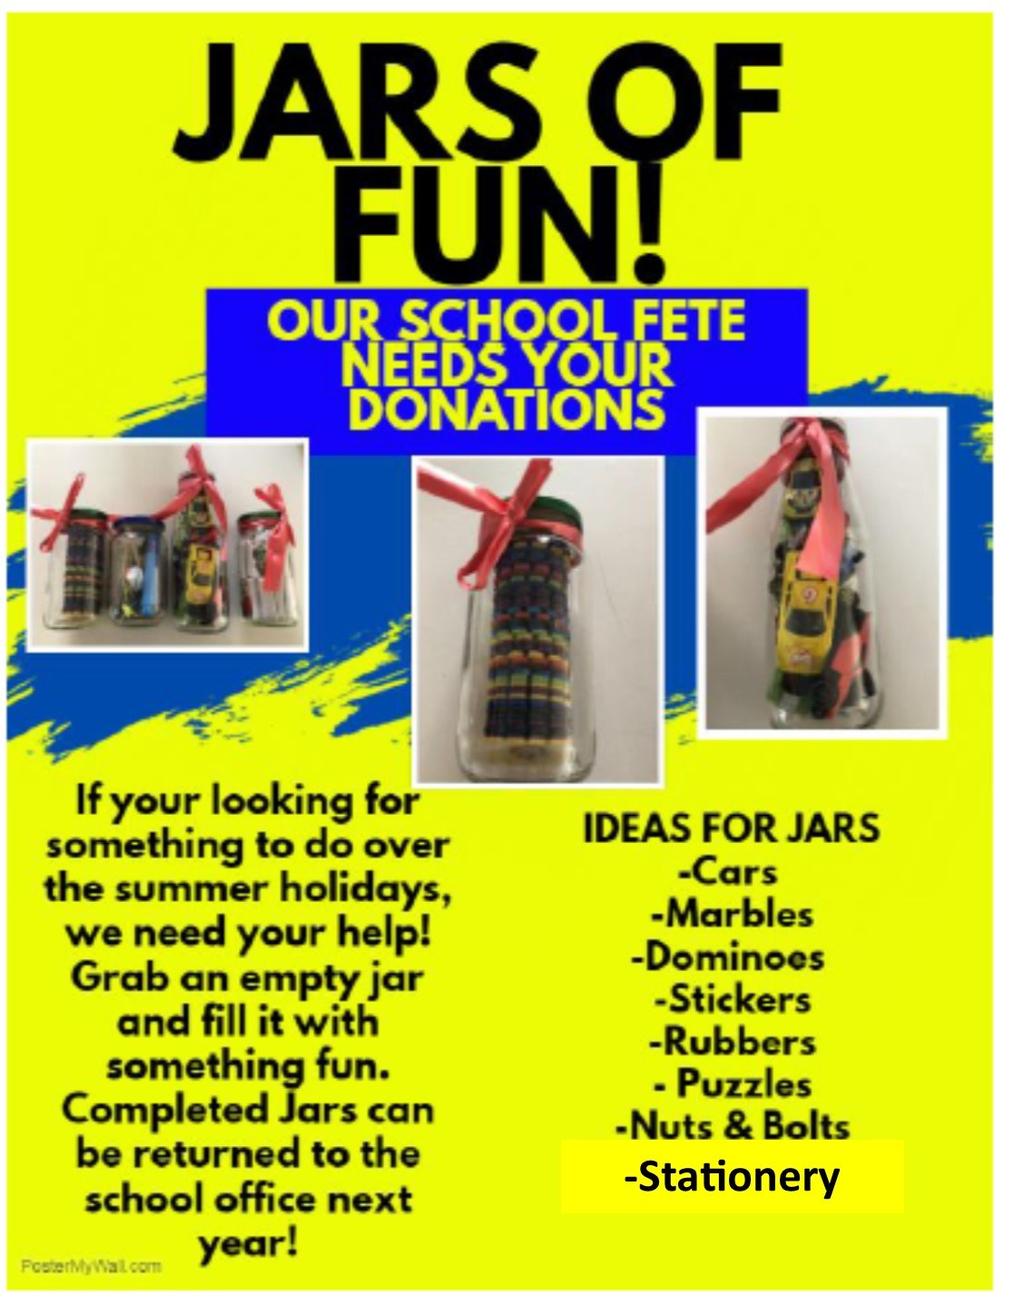 If you managed to fill a jar over the school holiday s for our Jars of fun table at the school fete can you please return them